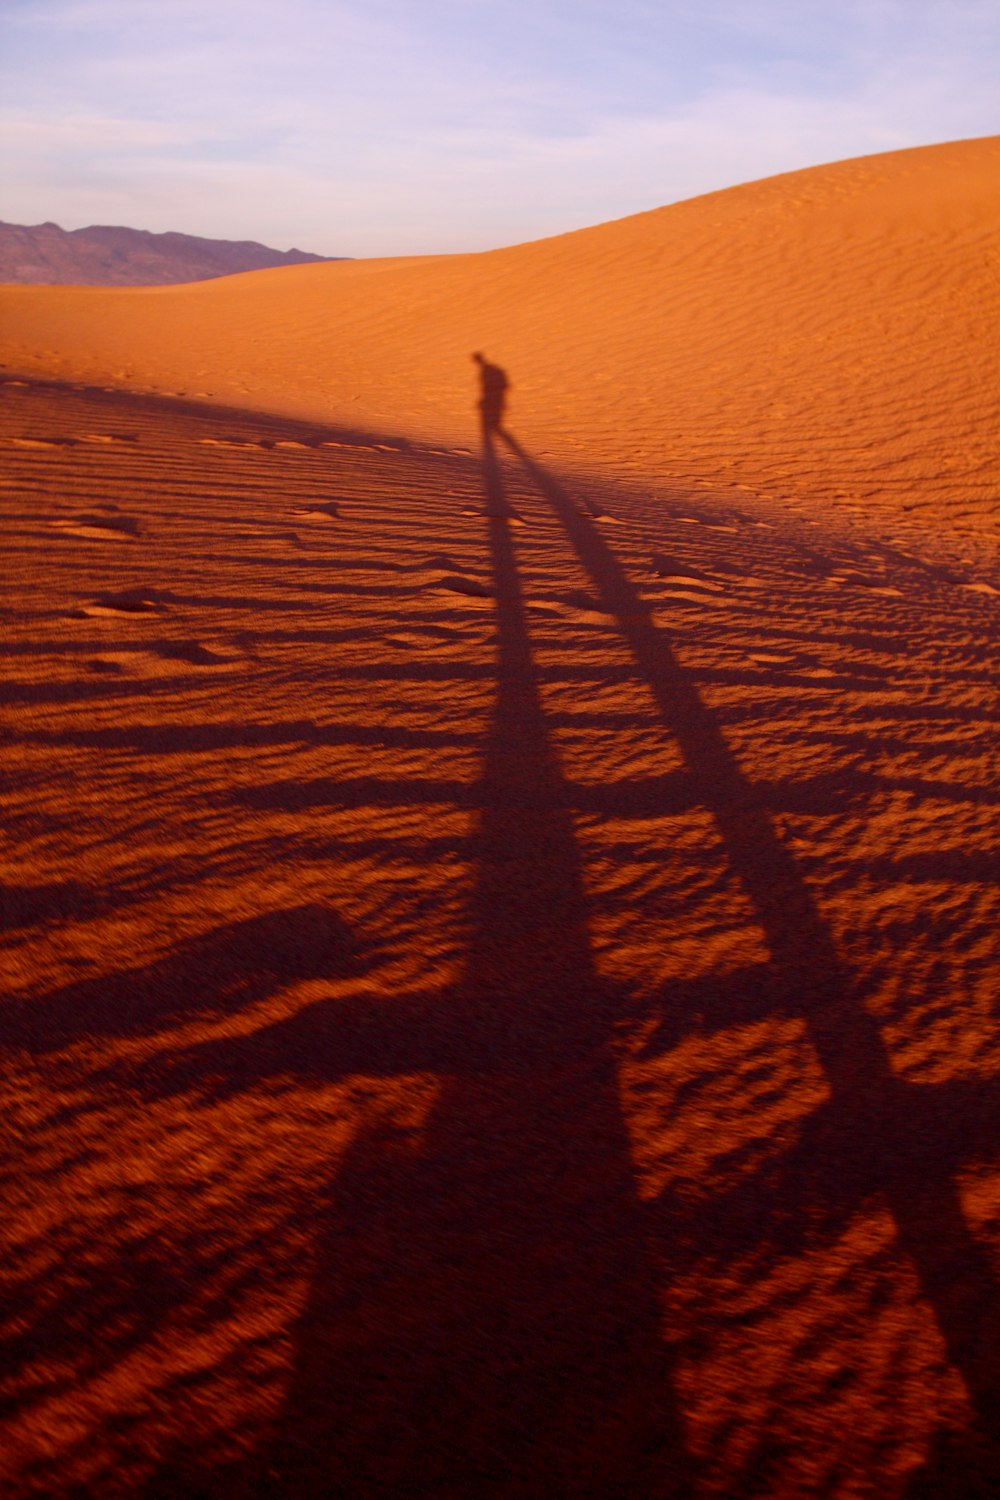 shadow of a person walking on desert